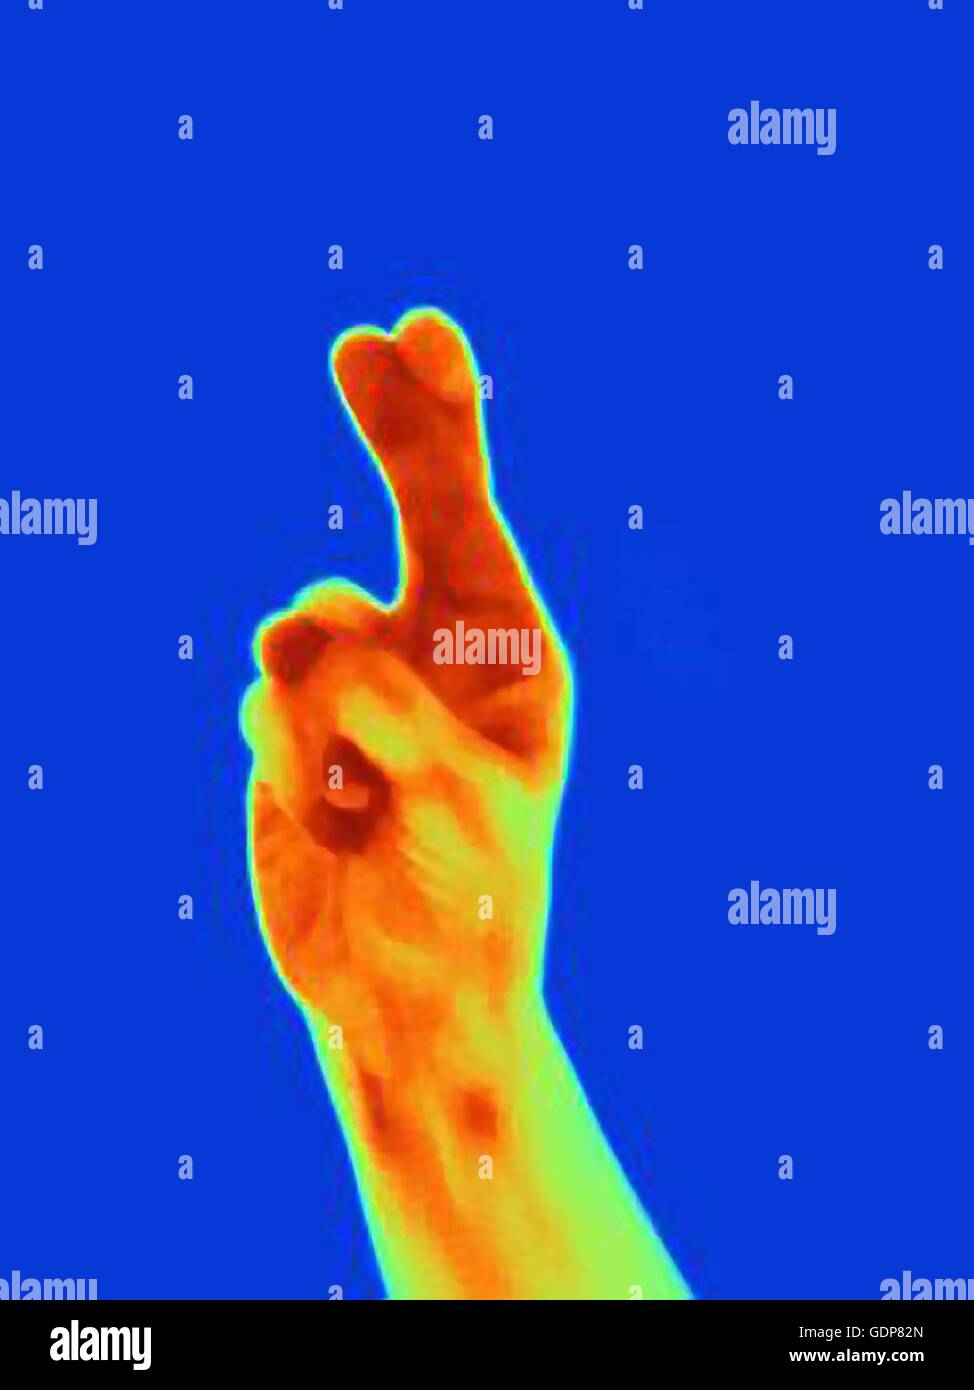 Thermal image of woman's hand with fingers crossed Stock Photo